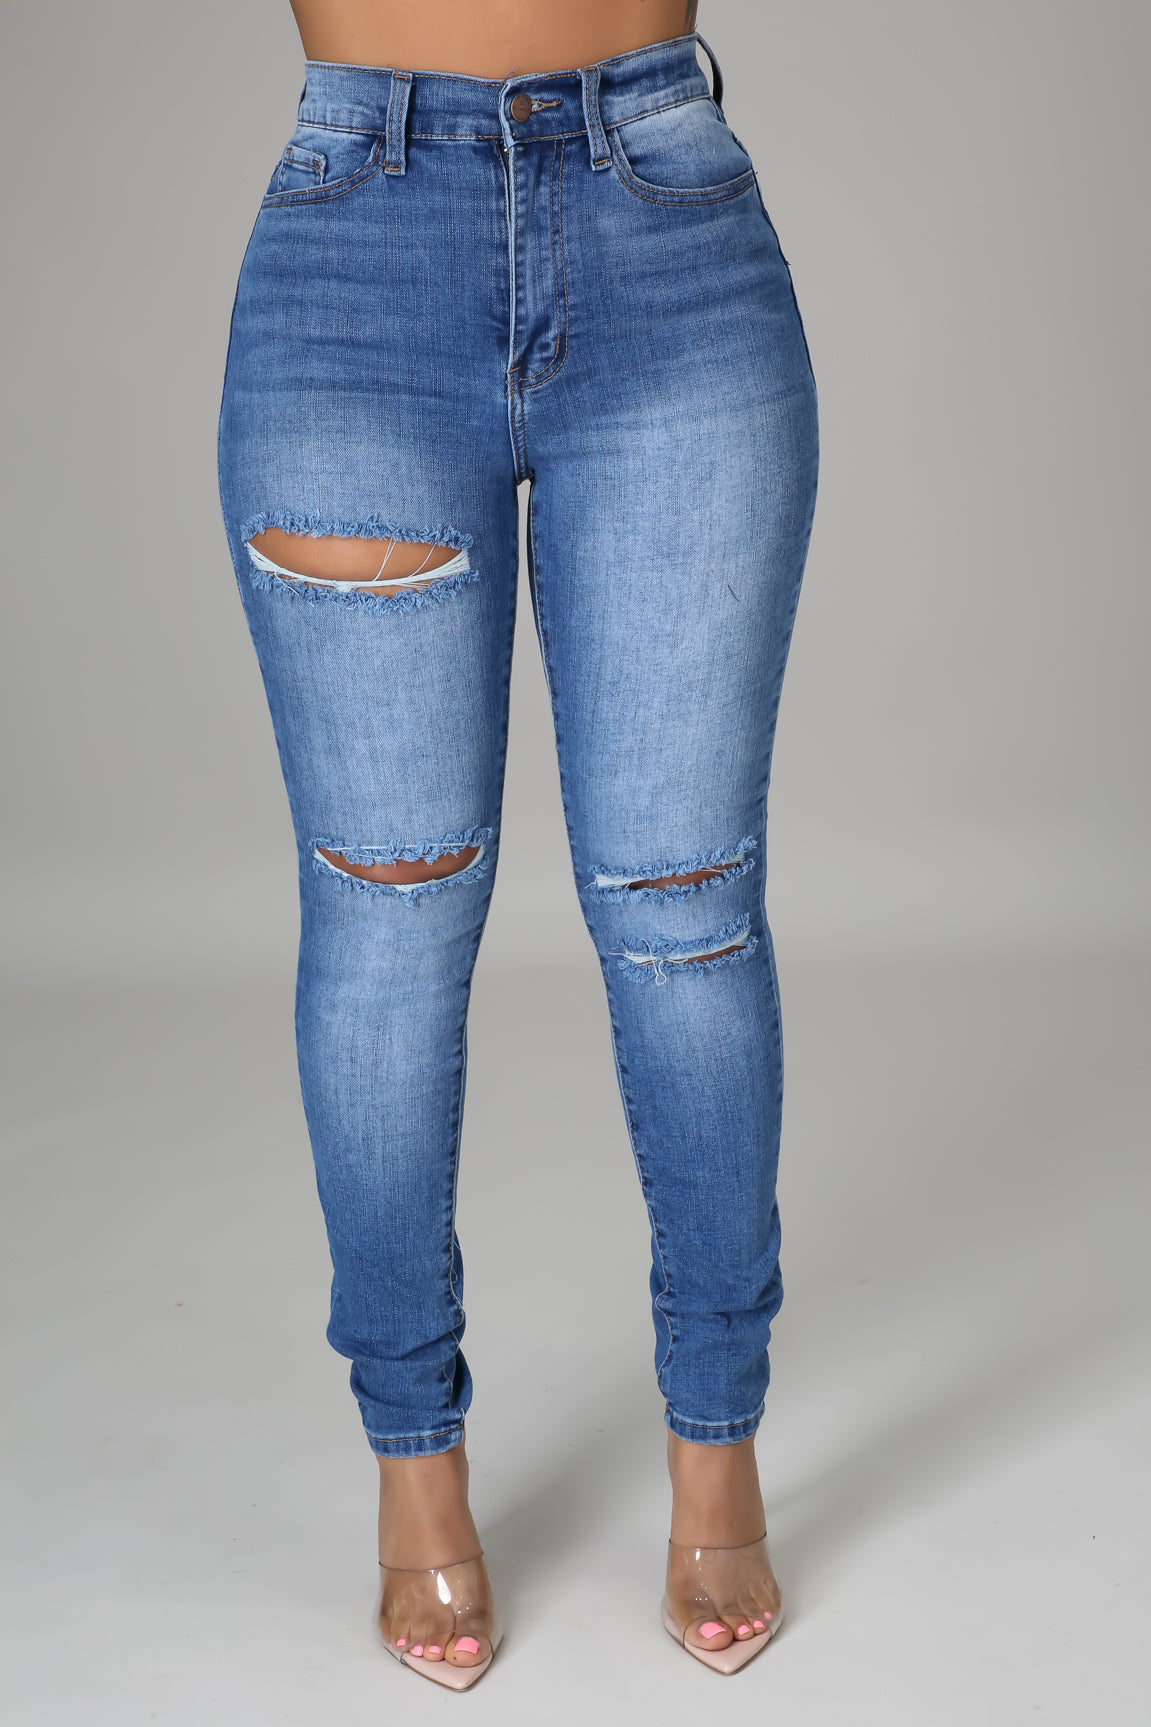 Perfect Pair Jeans